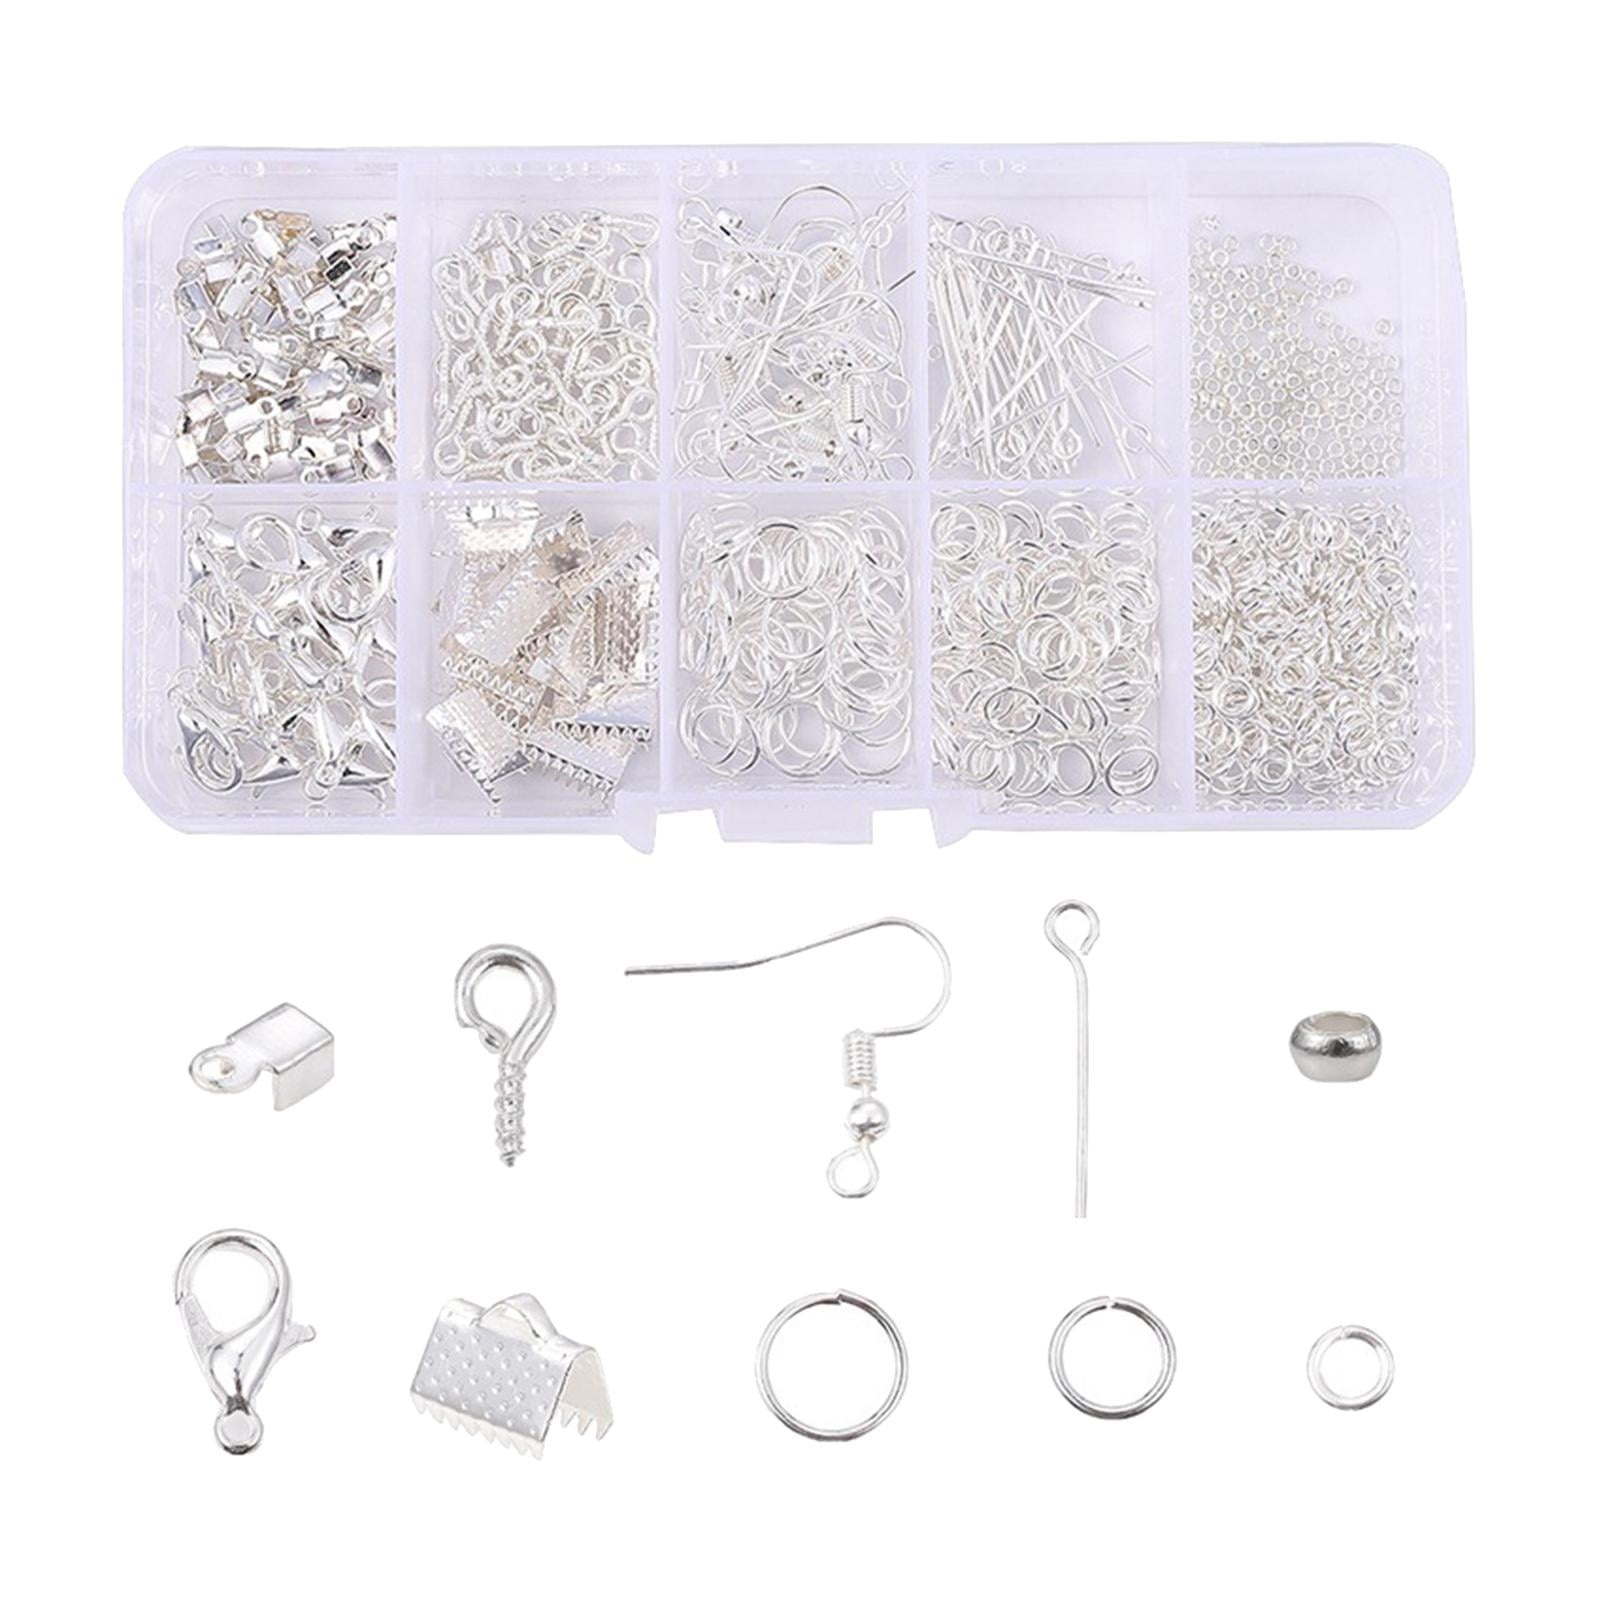 Earring Making Supplies Kit, Southwit 2900pcs Earring Hardware Pieces  Repair Parts with Earring Hooks Posts Backs and Jump Rings for Making  Earrings Studs and Jewelry Making (Silver & Gold) 